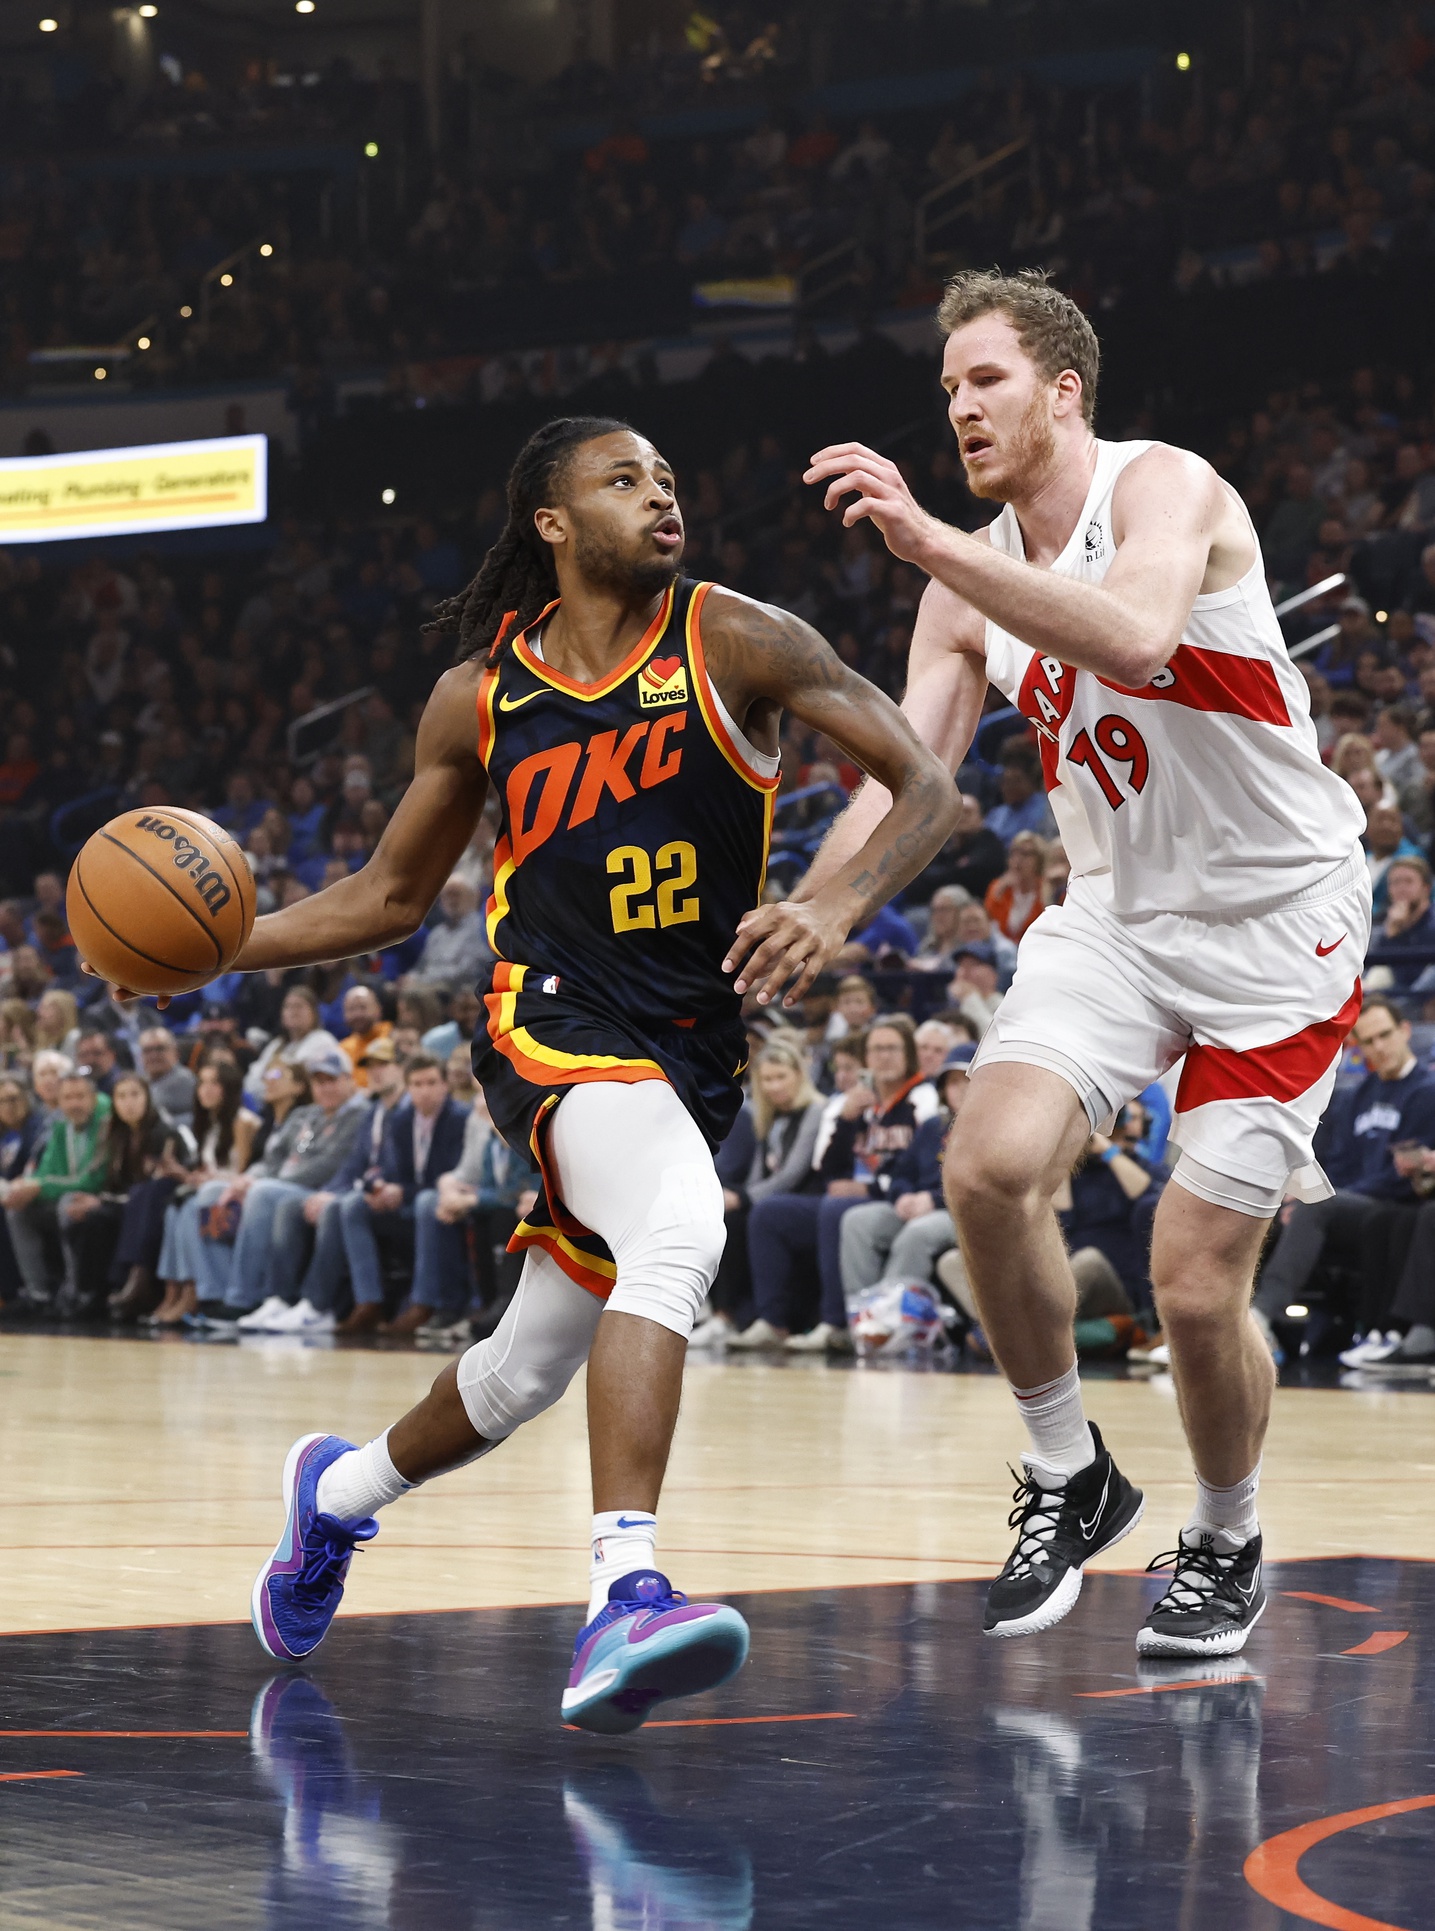 Oklahoma City Thunder guard Cason Wallace (22) drives to the basket beside Toronto Raptors center Jakob Poeltl (19) during the first quarter at Paycom Center.